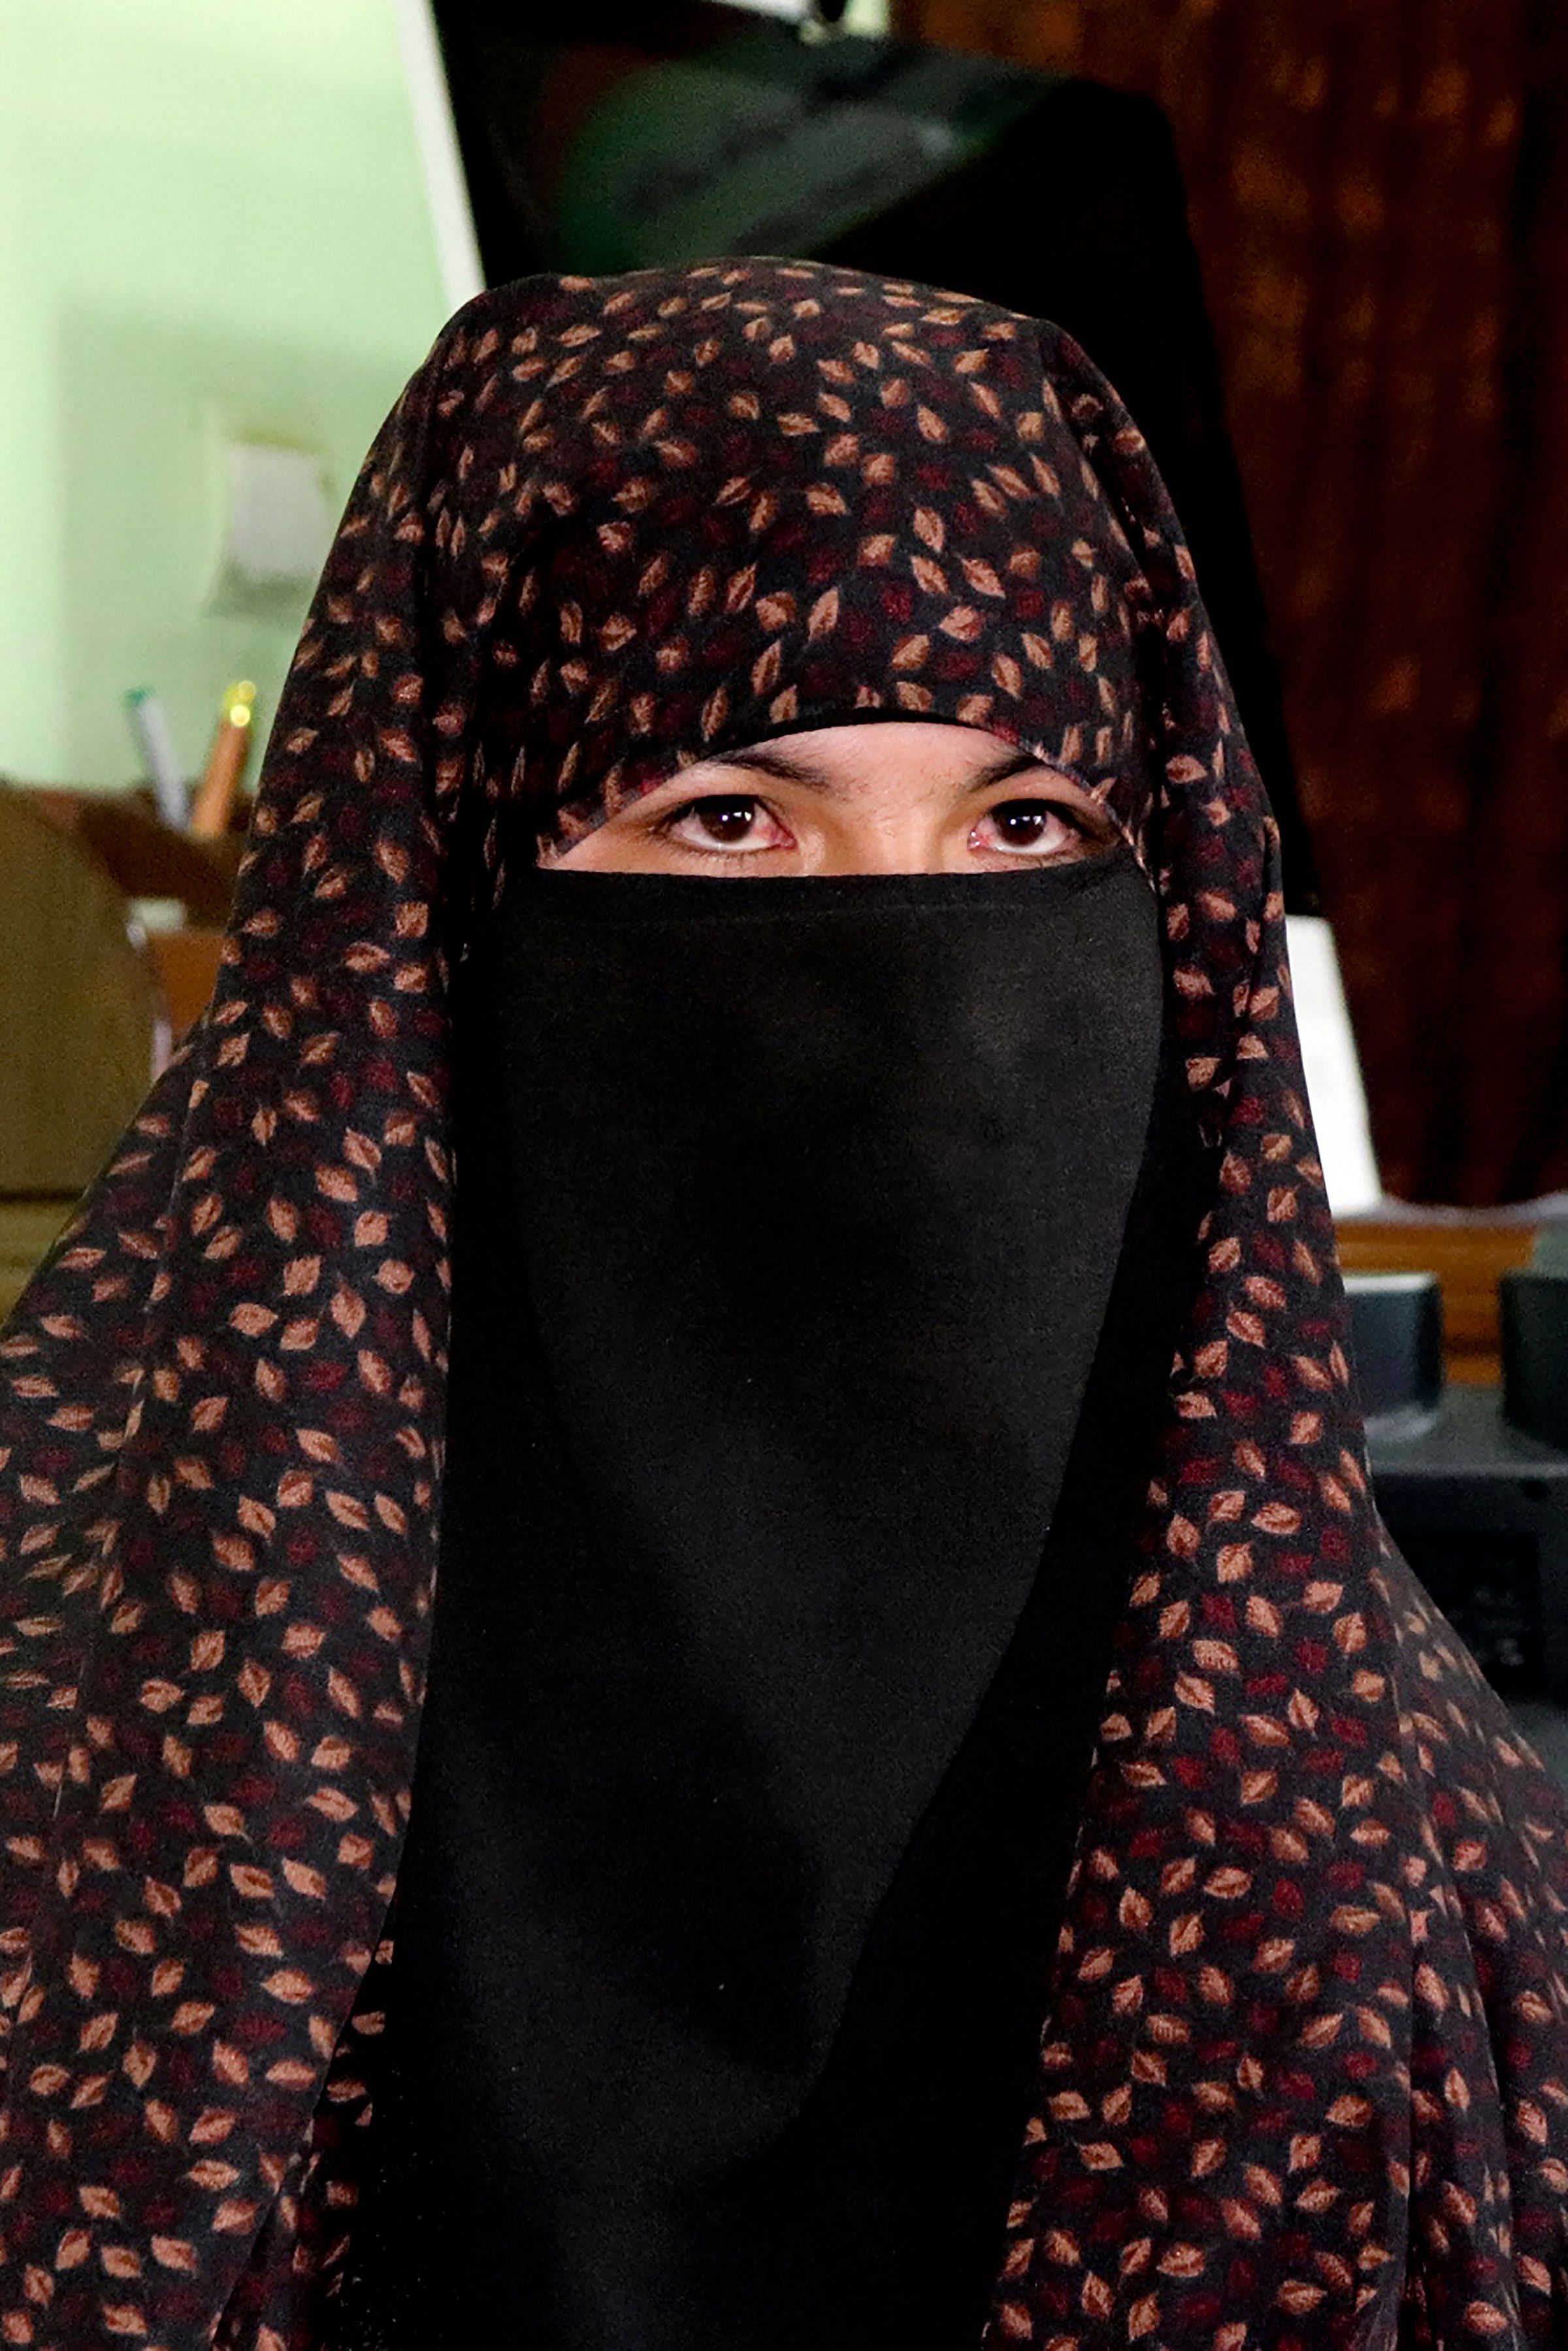 Qamar Gul, 15, who shot with an AK-47 gun two Taliban fighters after they attacked her home, sits at the Governor's office in Feroz Koh. Credits: AFP Photo